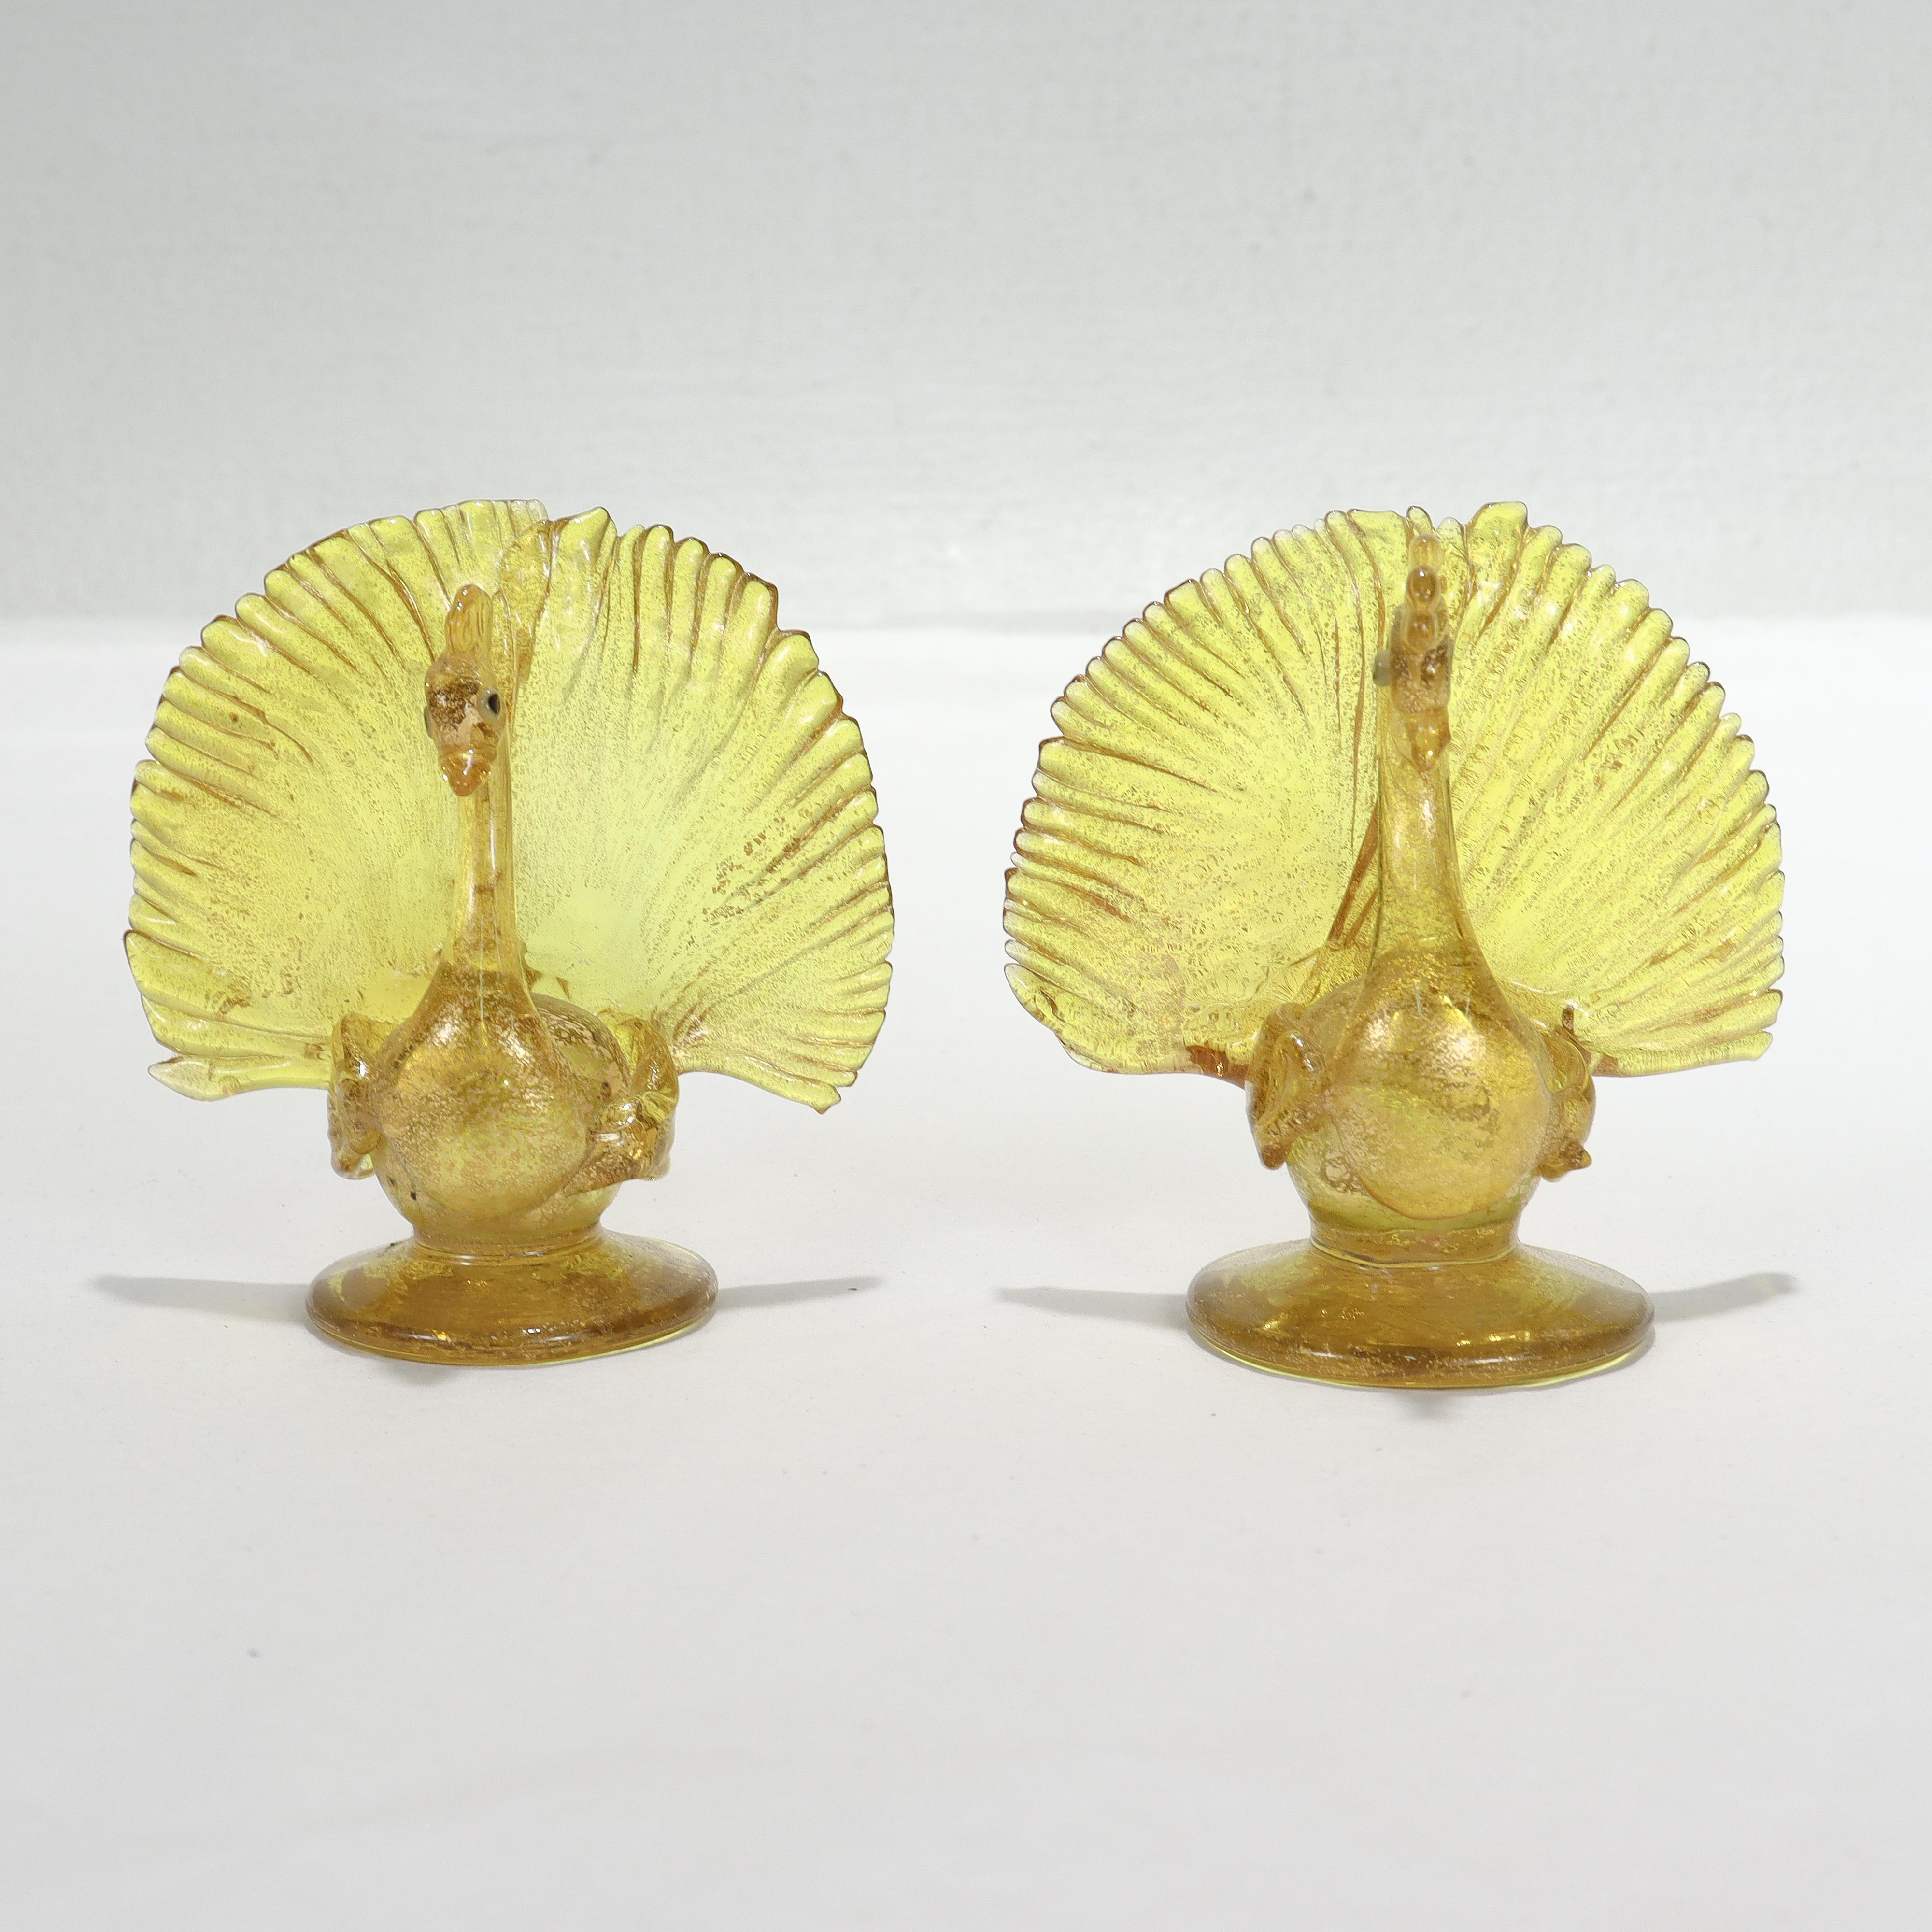 Pair Salviati Attributed Venetian/Murano Glass Peacock Place Card Holder Figures In Good Condition For Sale In Philadelphia, PA